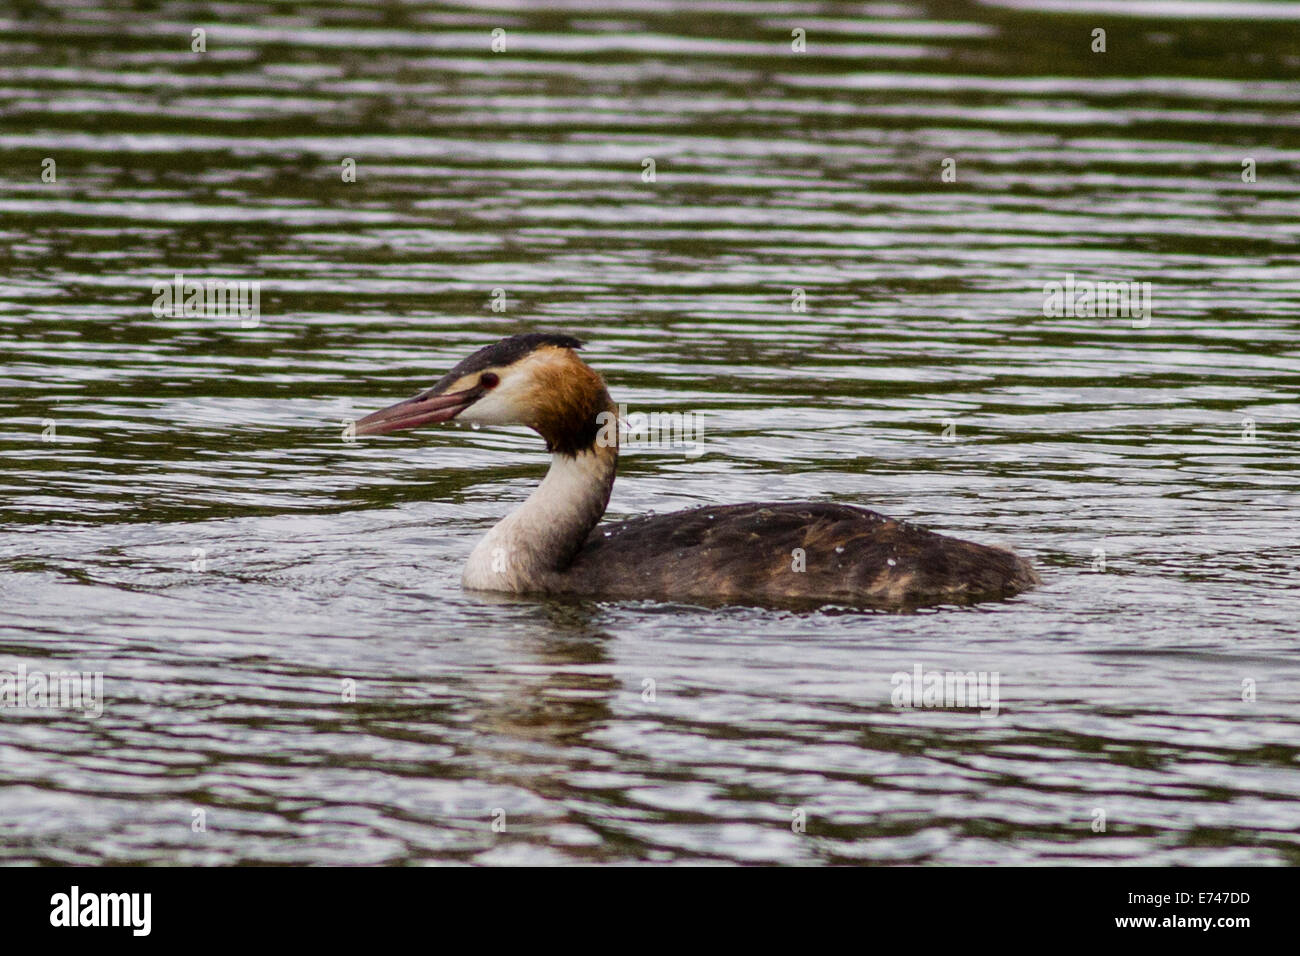 Adult Great Crested Grebe (Podiceps cristatus) swimming Stock Photo